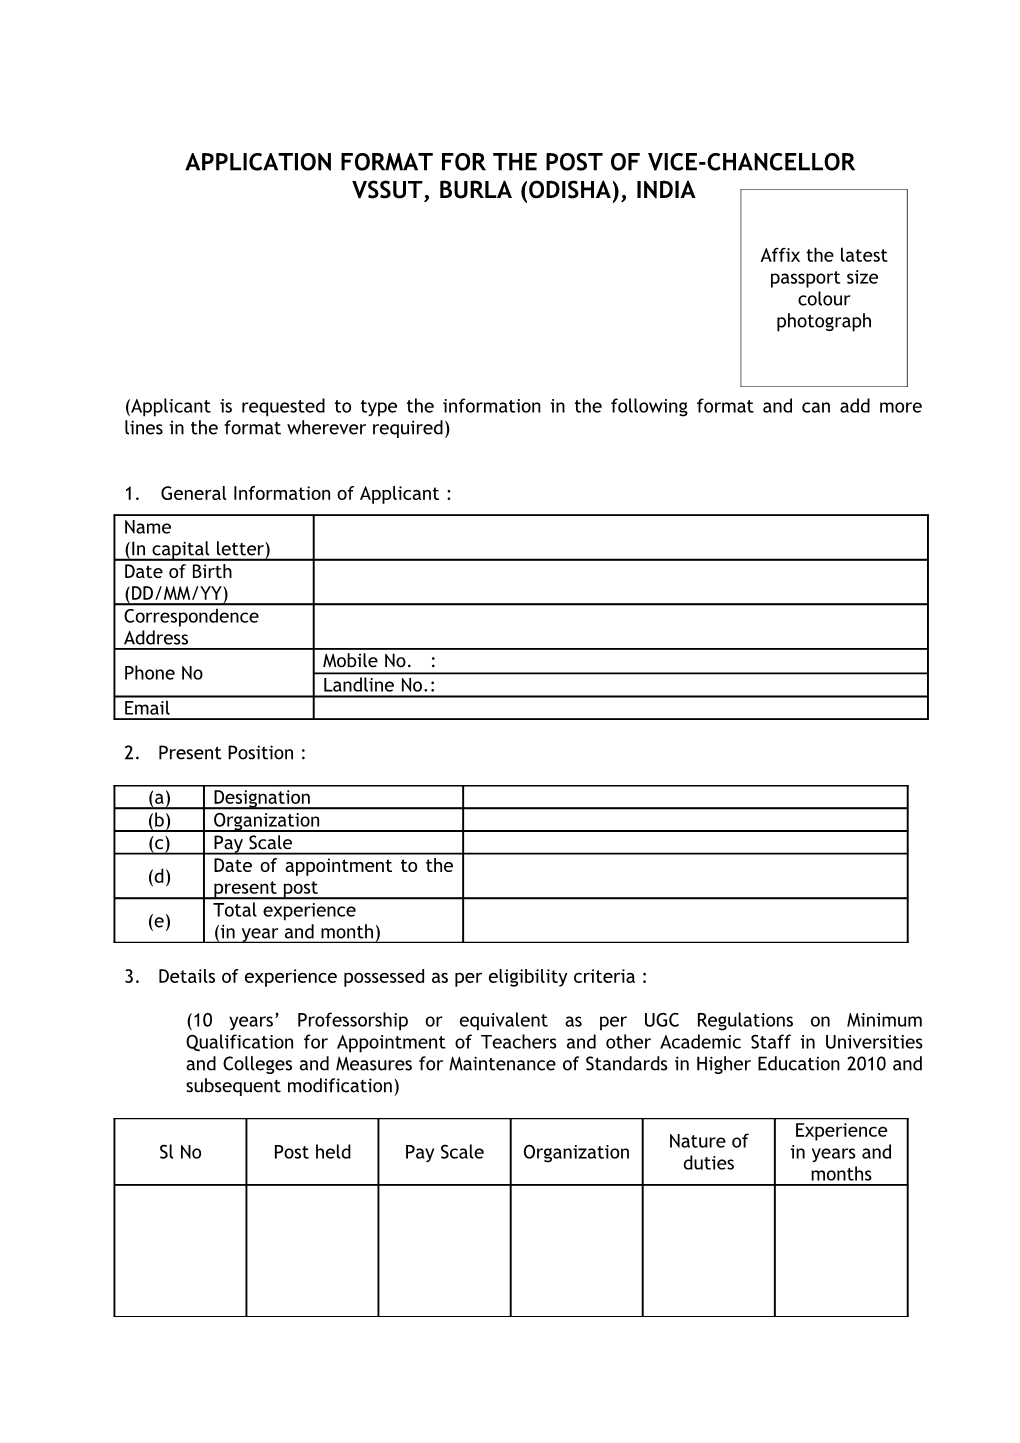 Application Format for the Post of Vice Chancellor